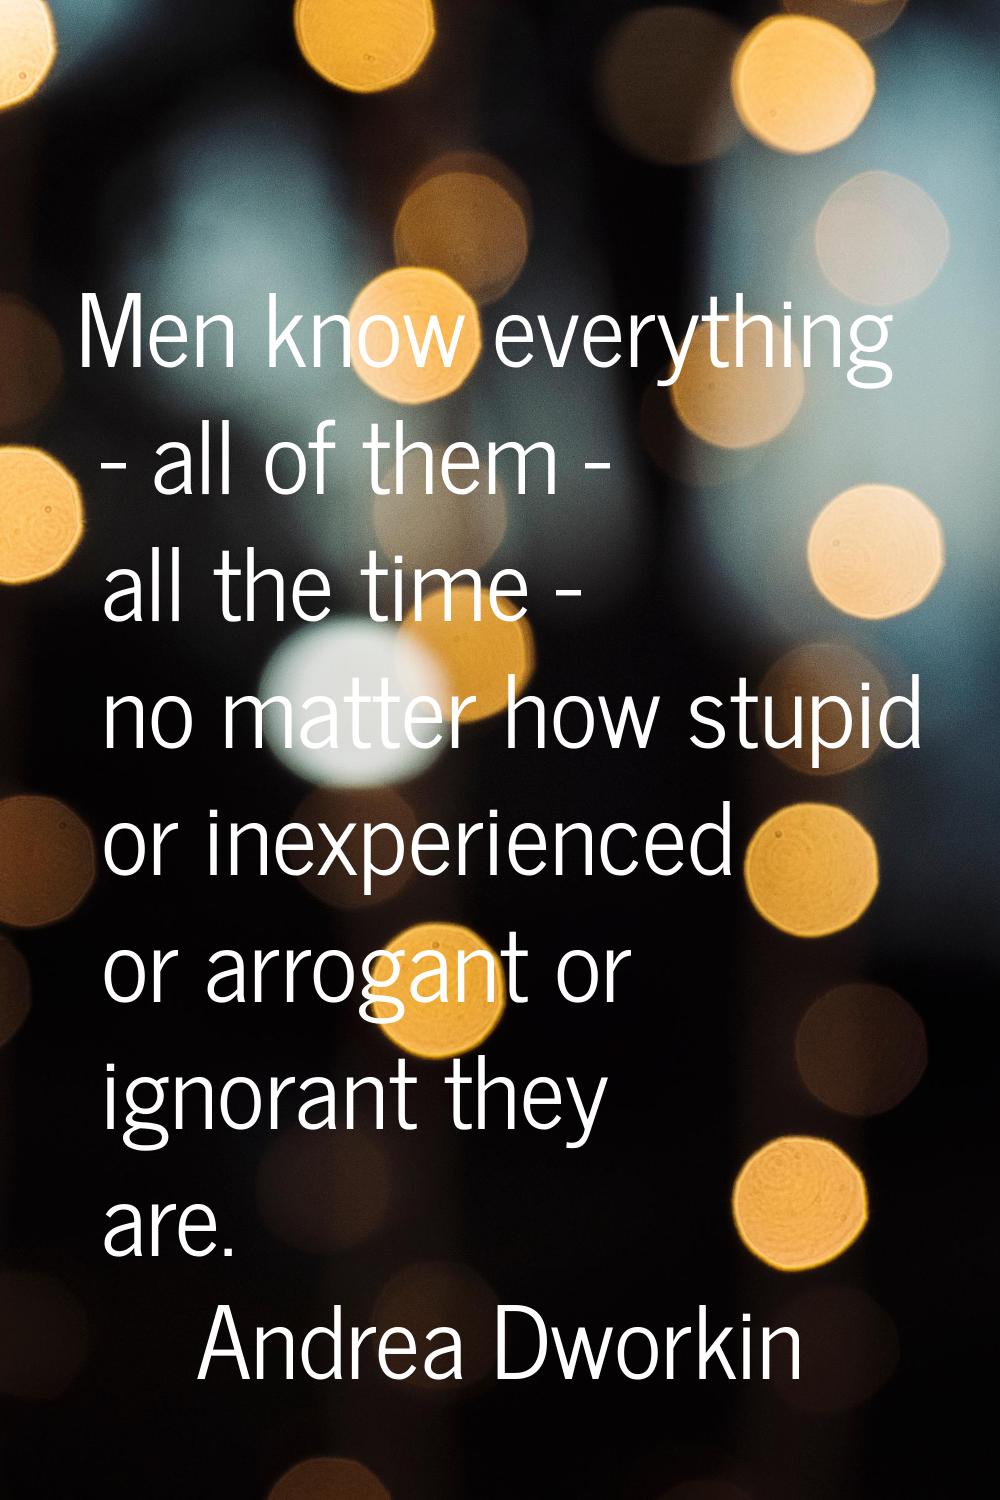 Men know everything - all of them - all the time - no matter how stupid or inexperienced or arrogan